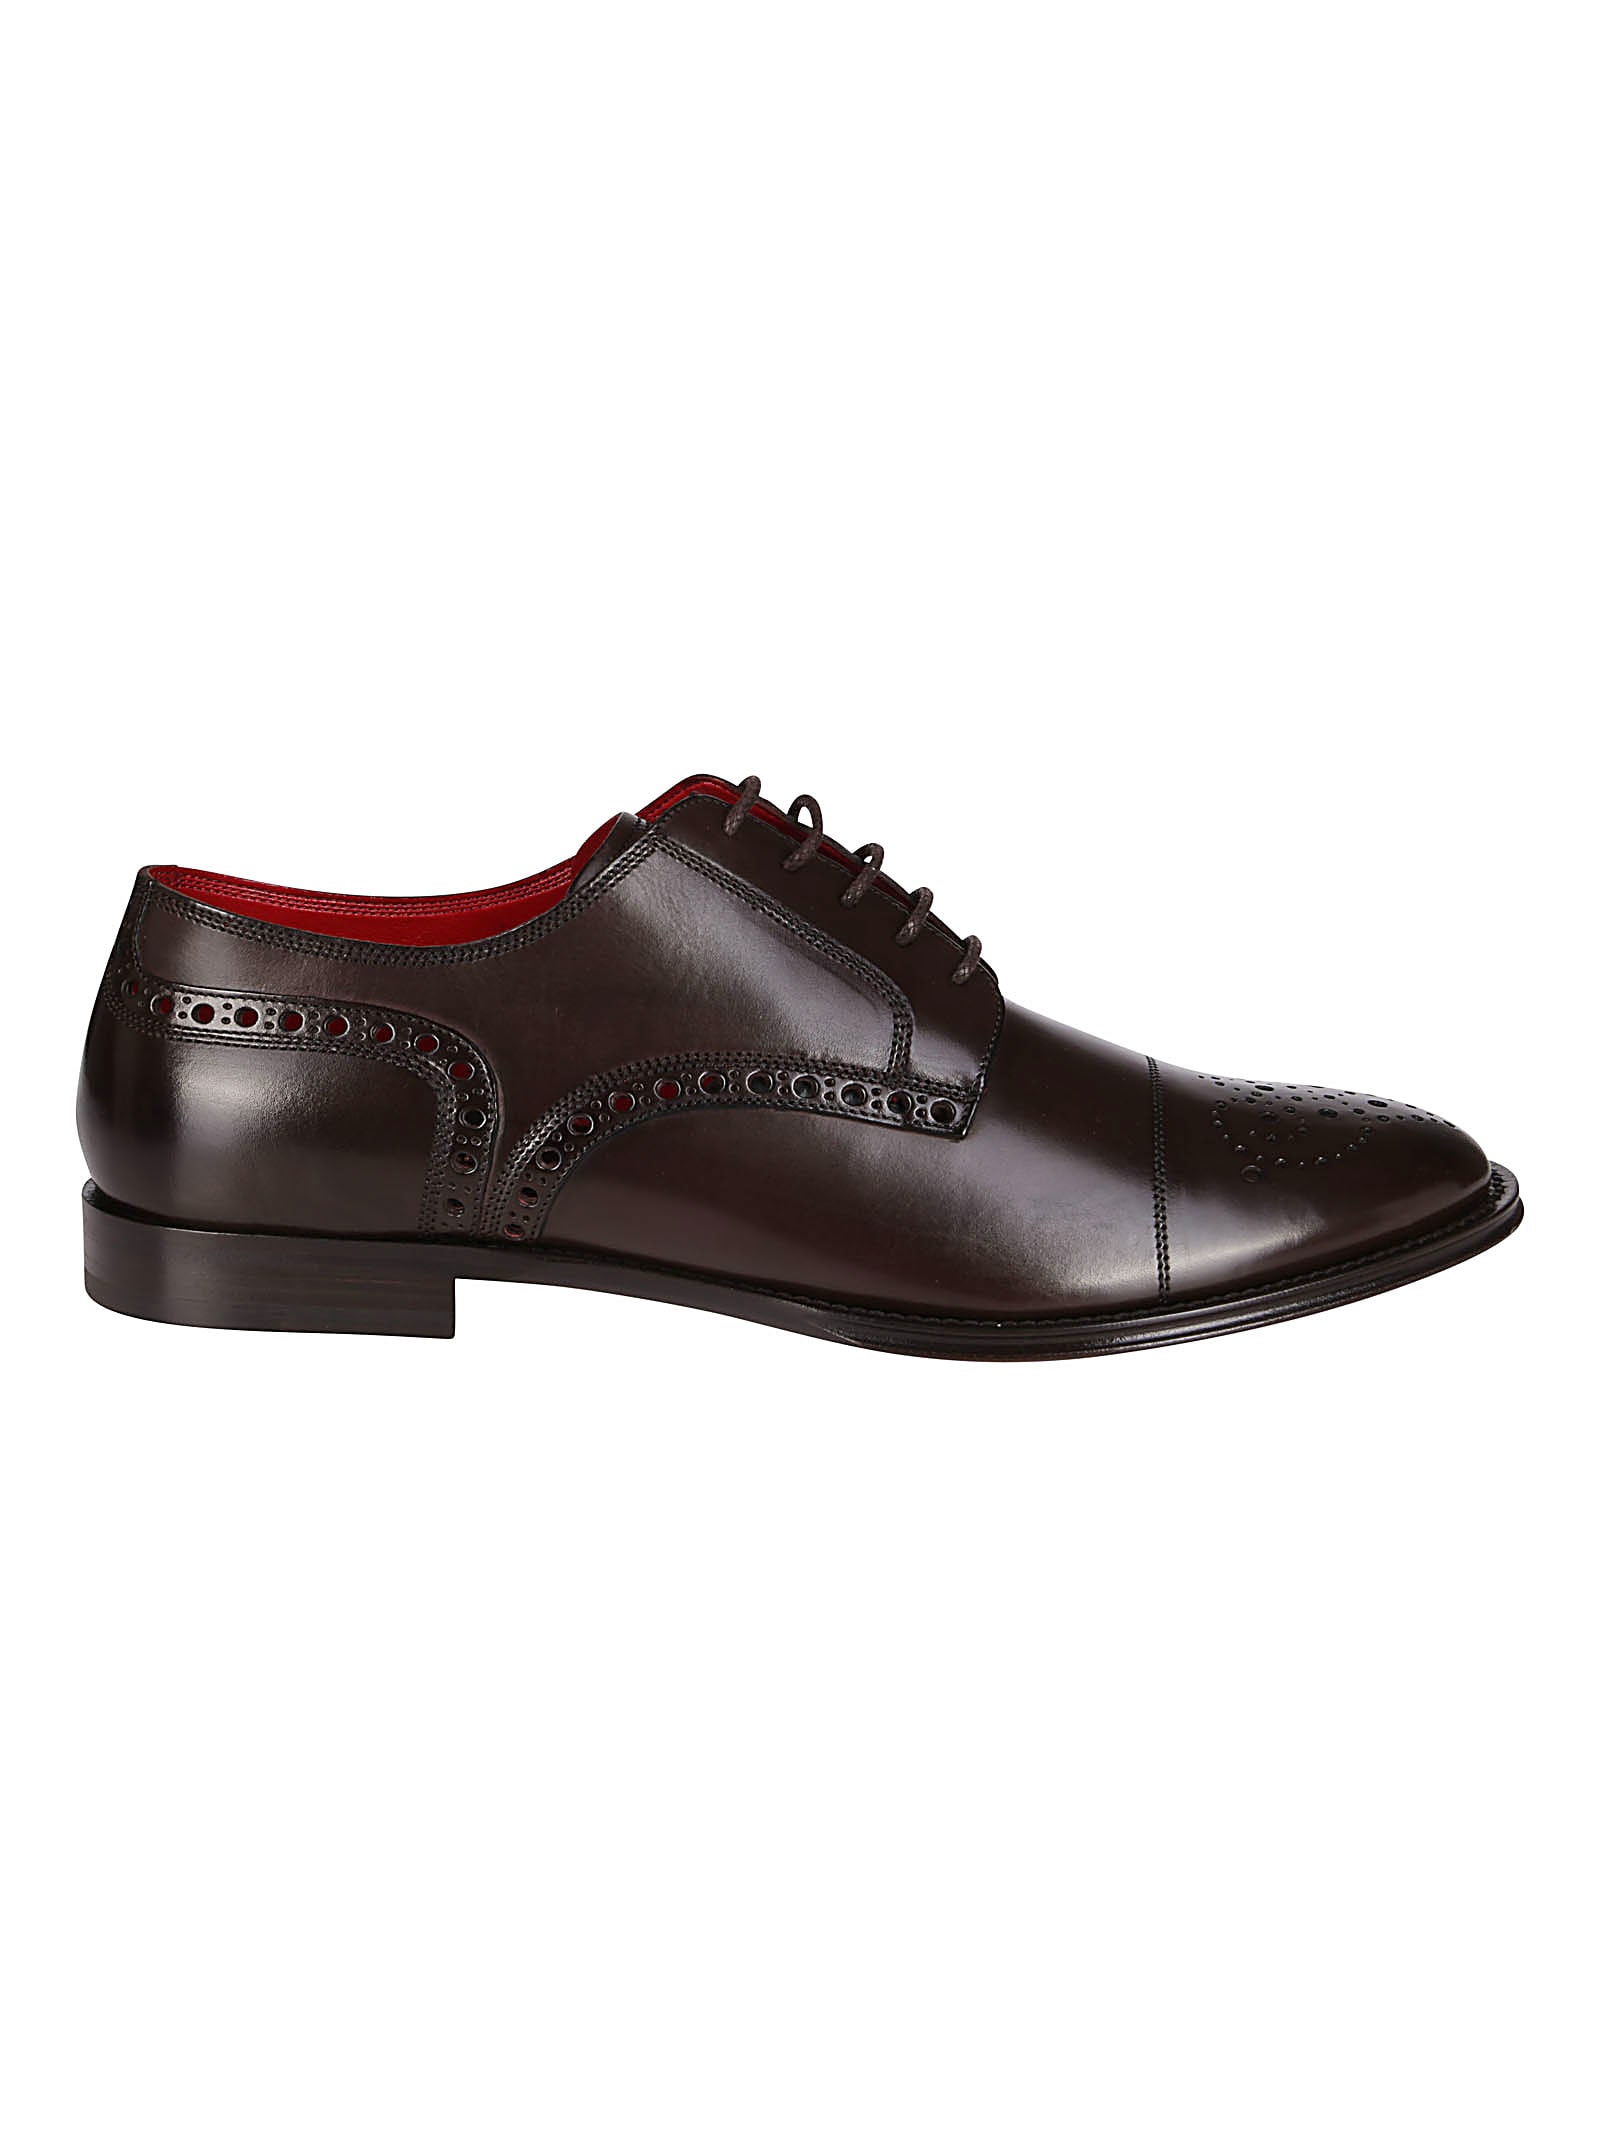 DOLCE & GABBANA BROWN LEATHER DERBY SHOES,11285326